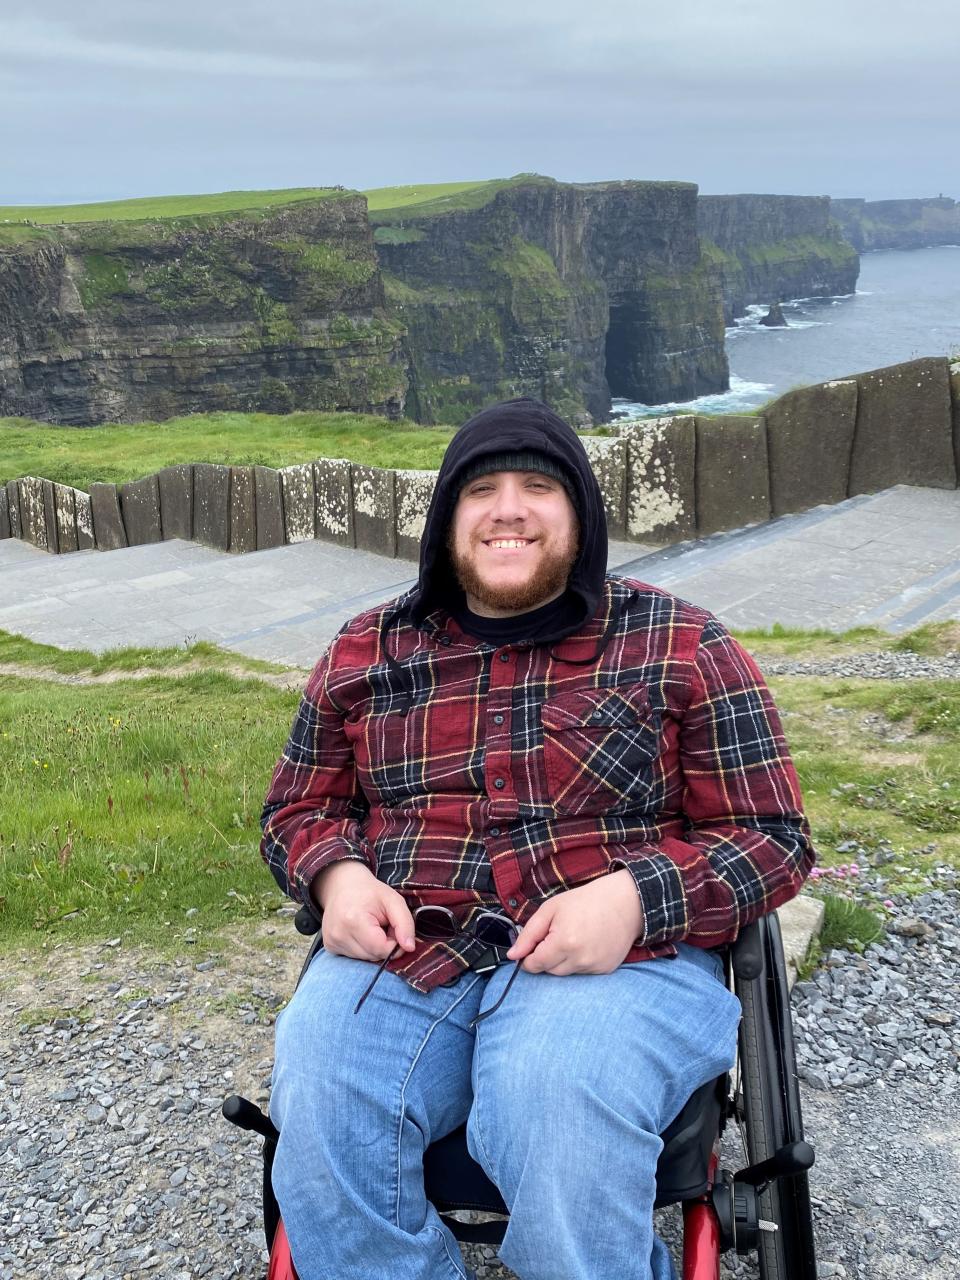 Michael Triola's wheelchair was damaged on a United Airlines flight, but his father and some airline maintenance workers were able to repair it at the airport.